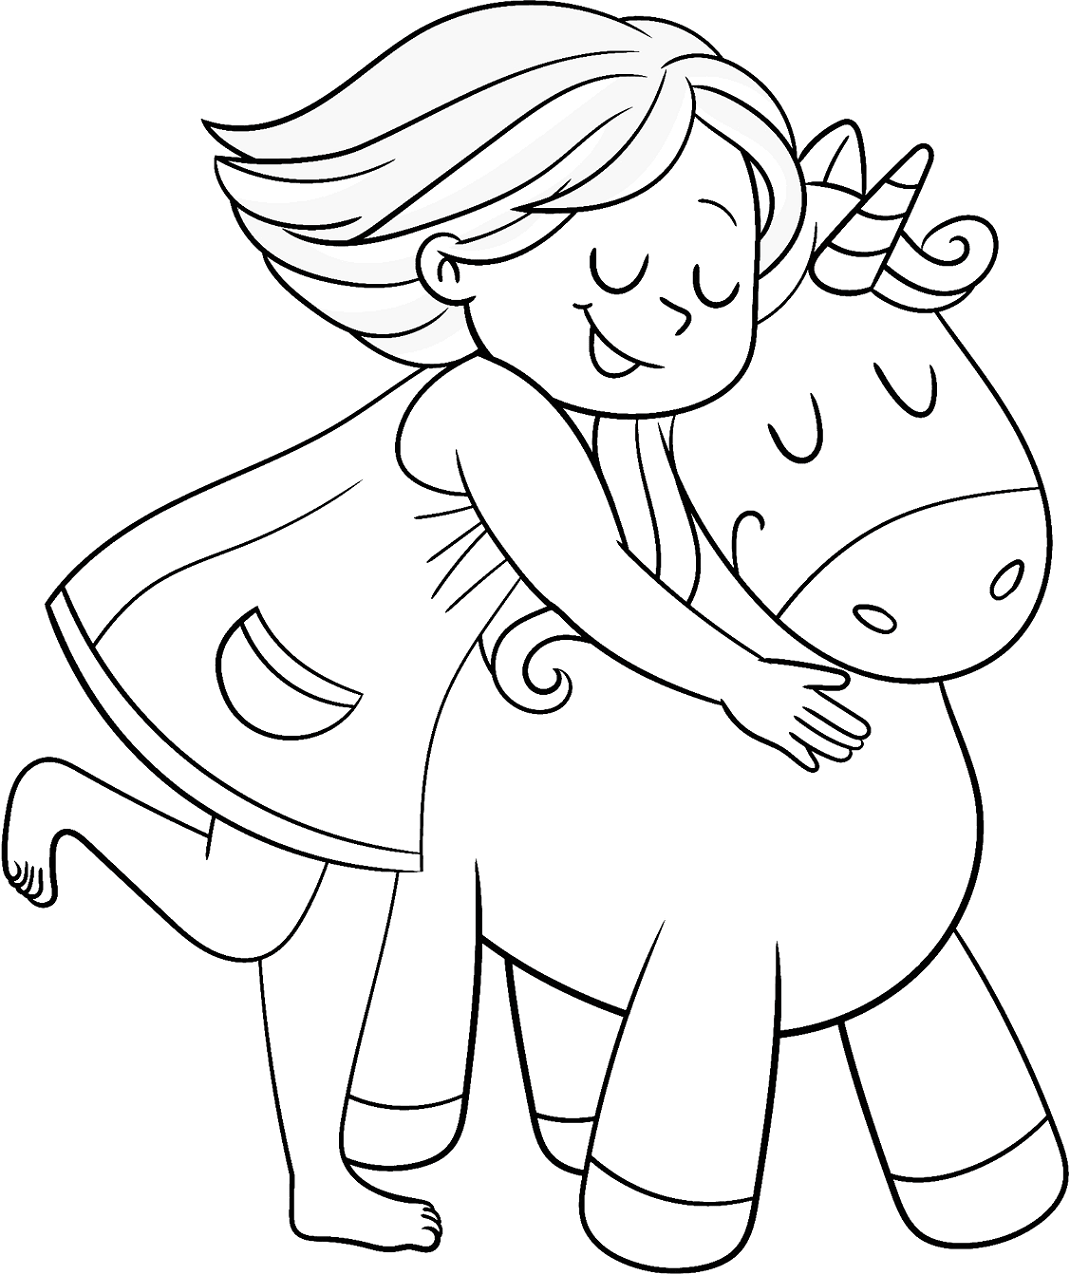 Girl With Unicorn Coloring Page - Free Printable Coloring Pages for Kids